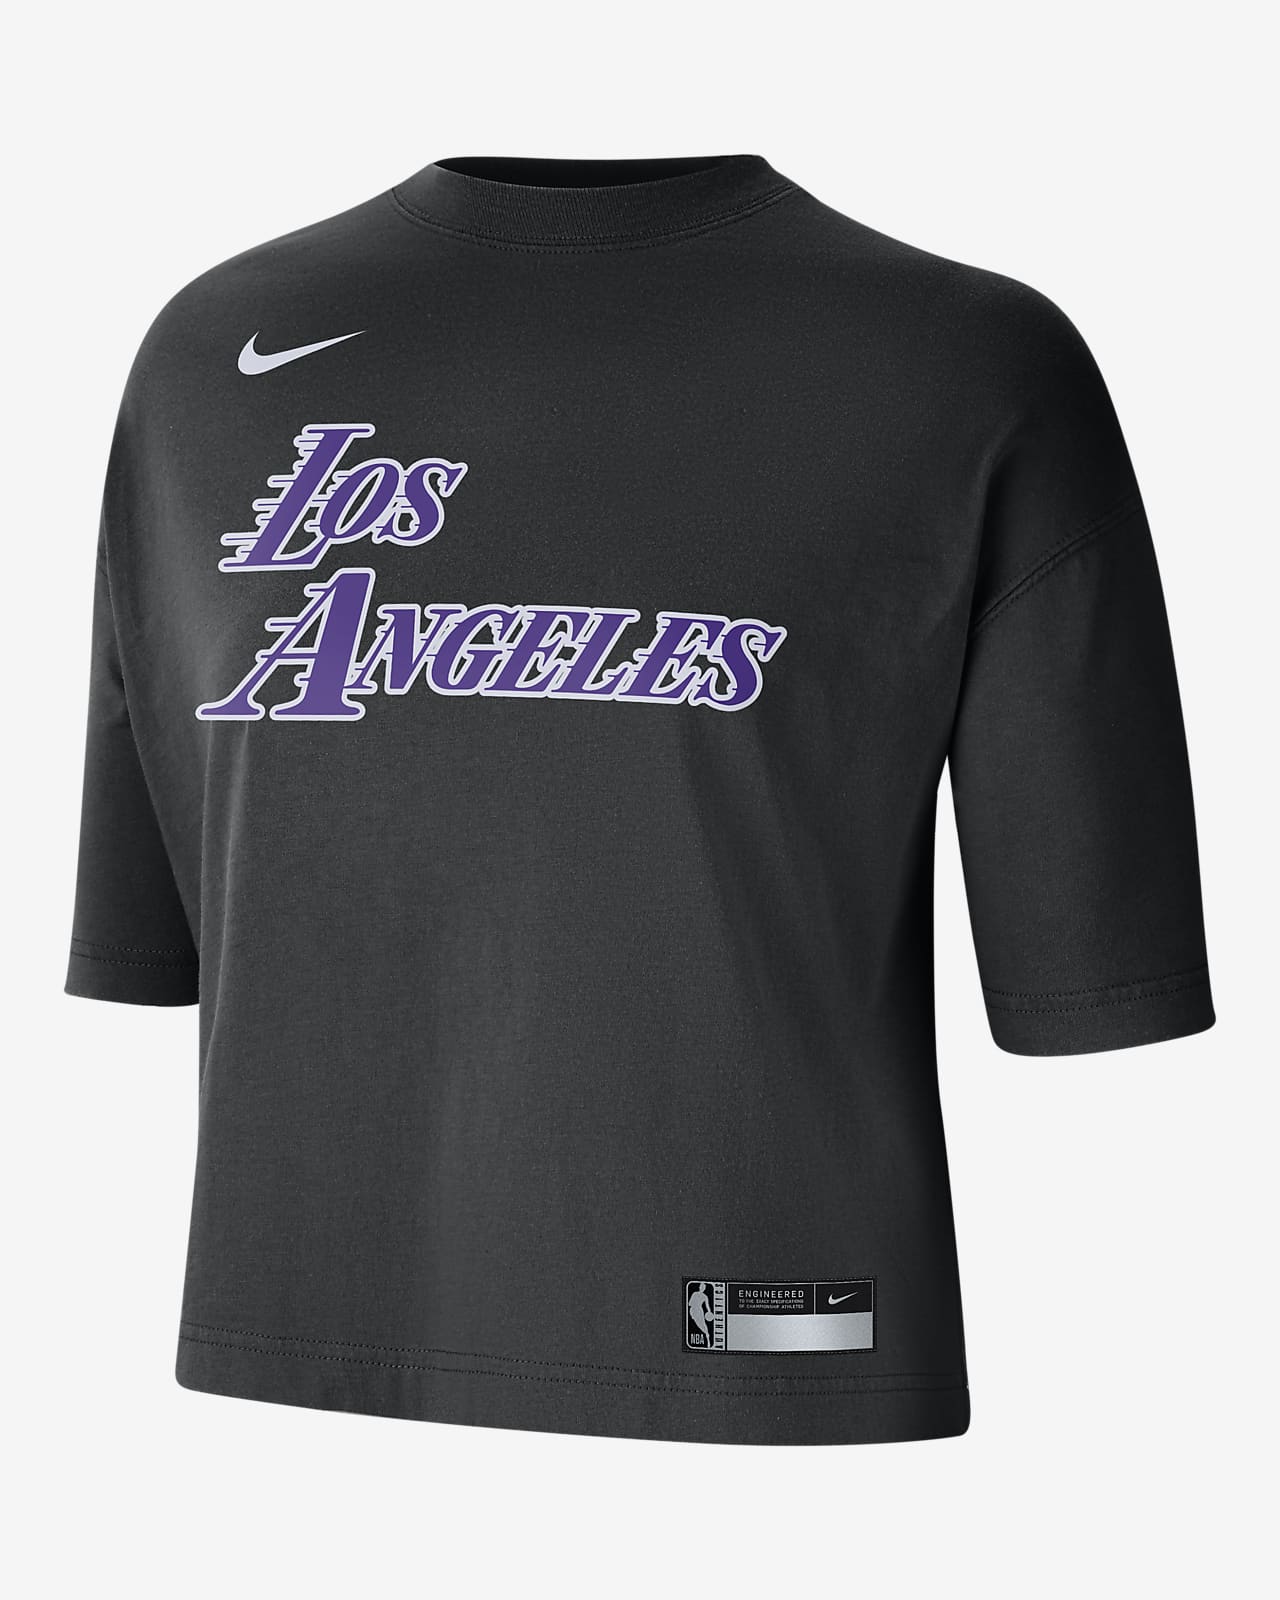 Gray Los Angeles Lakers NBA Jerseys for sale